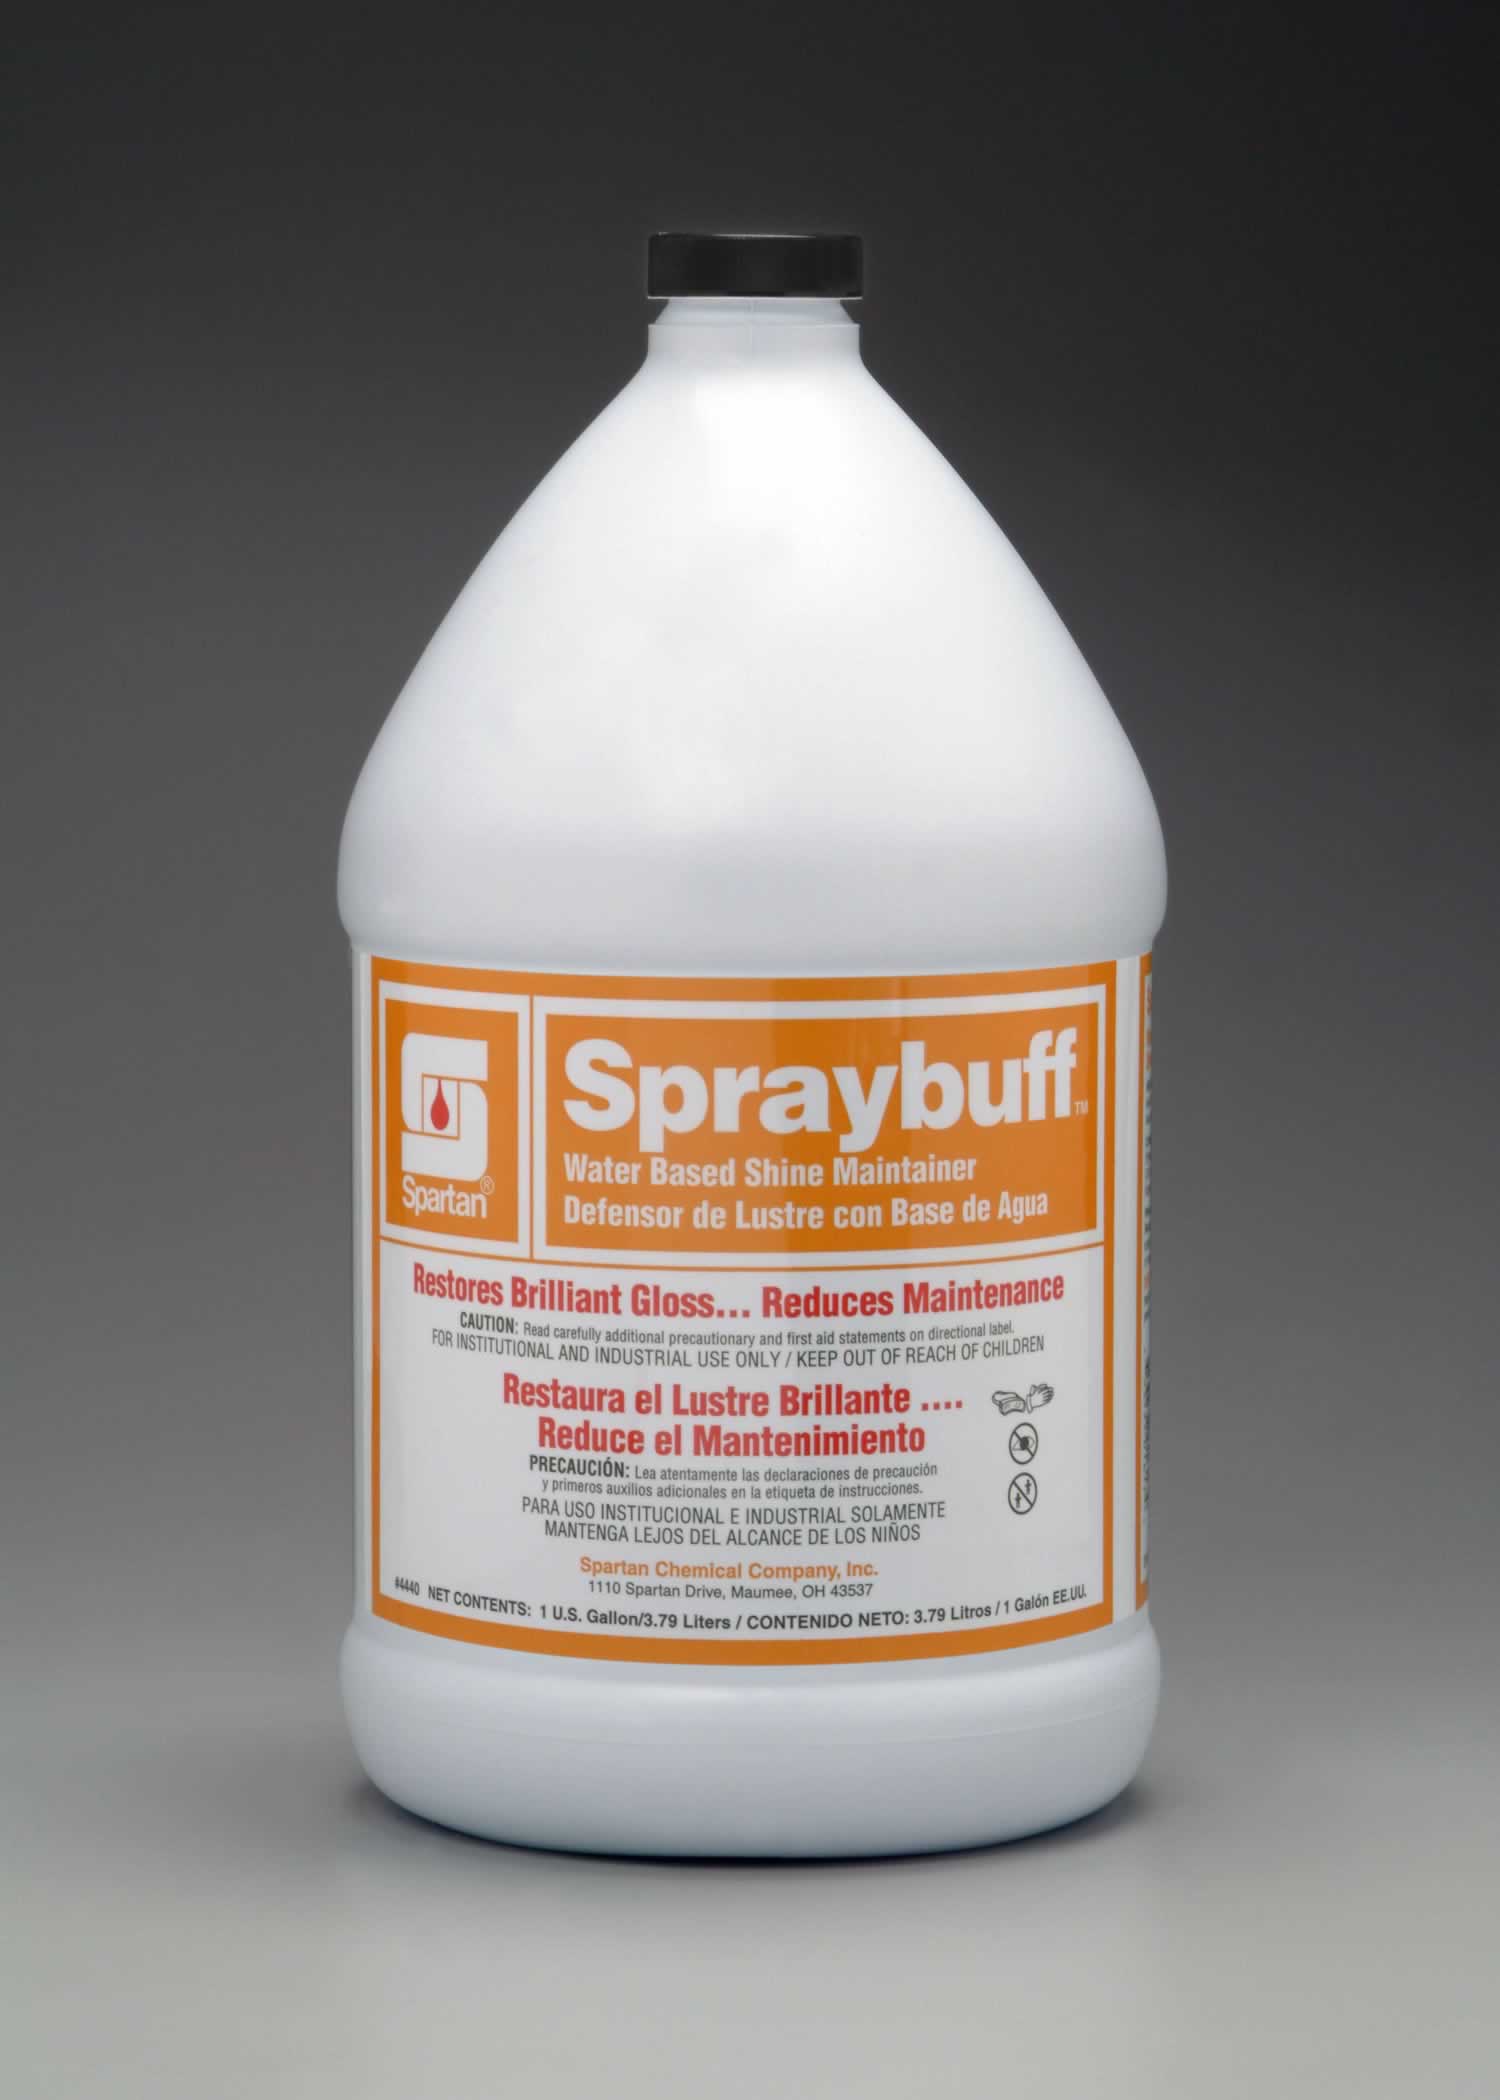 Spraybuff cleaner removes scuffs without affecting the finish on a floor